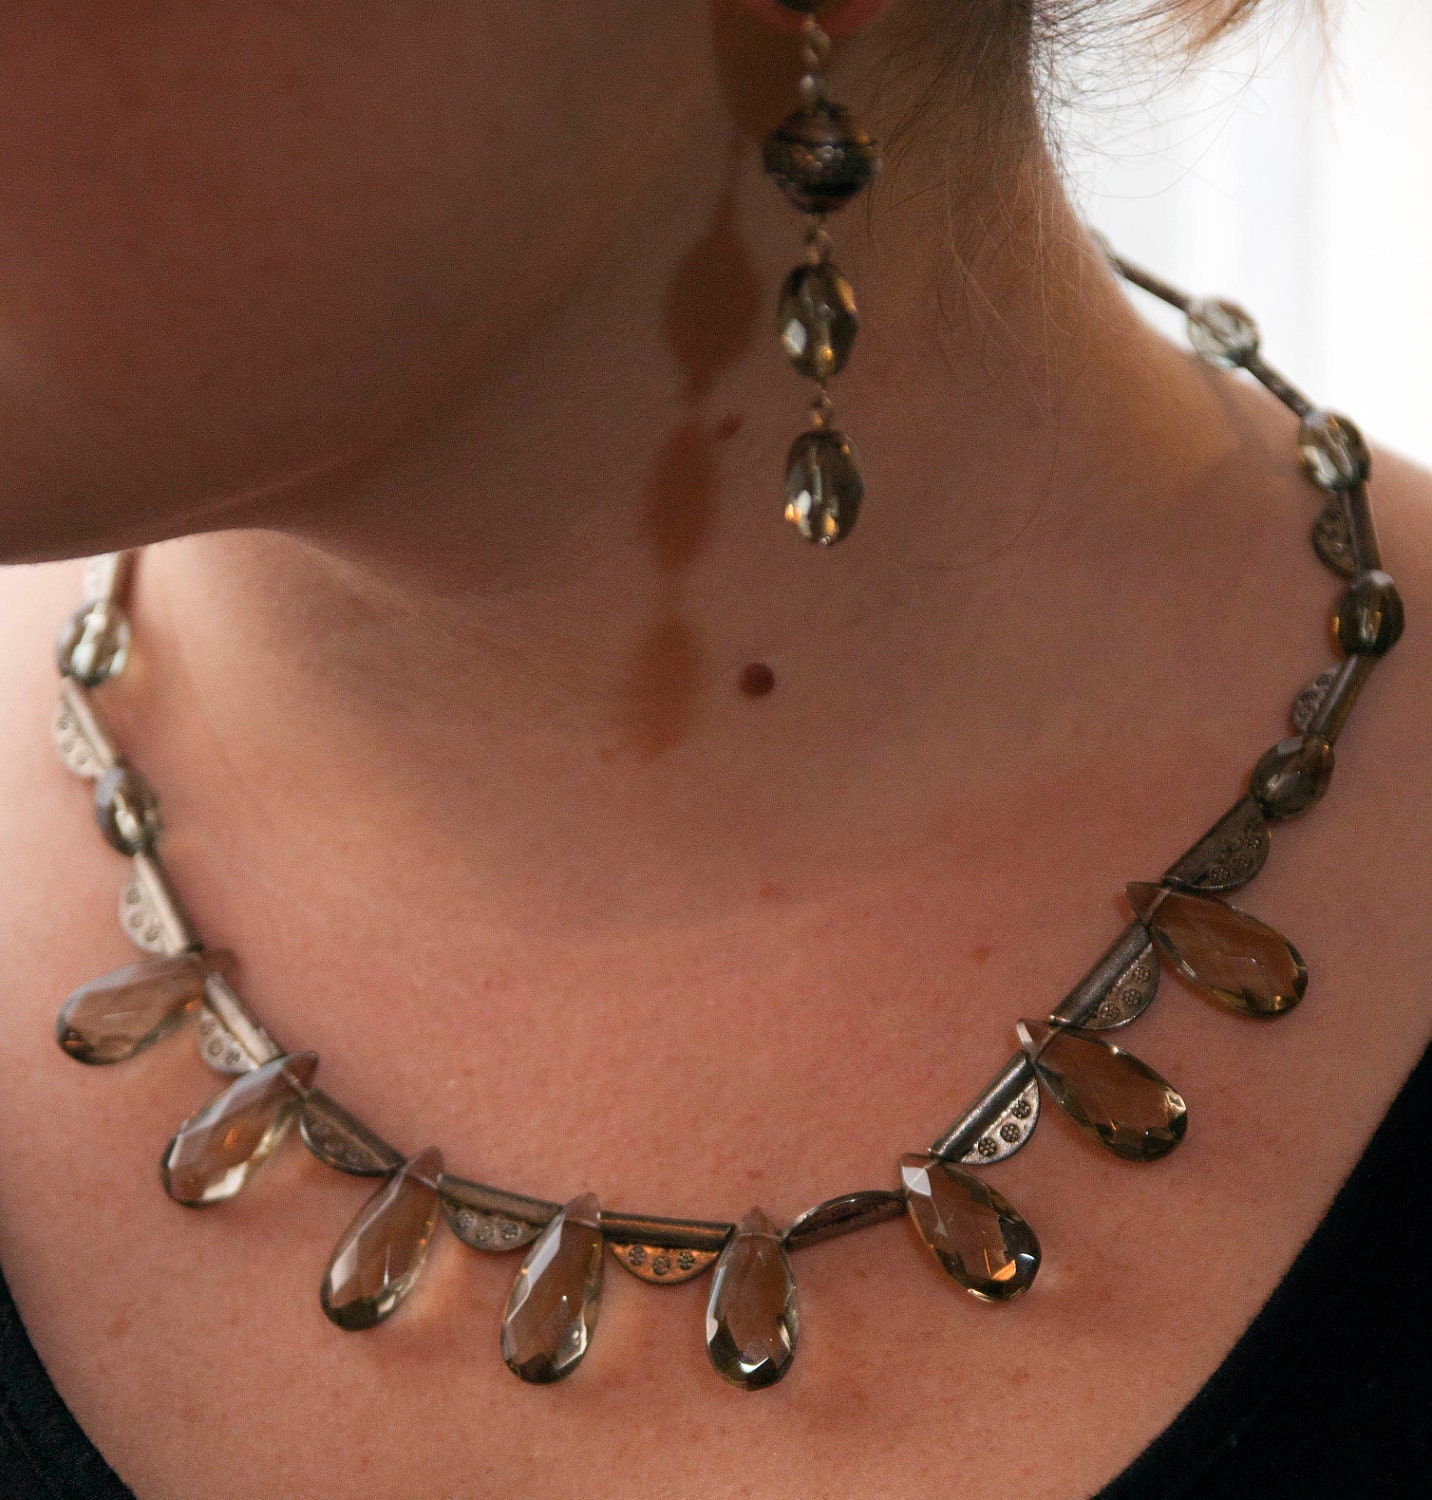 Smoky Quartz Art Deco style necklace. "Unchained Melody" Comes with matching earrings.